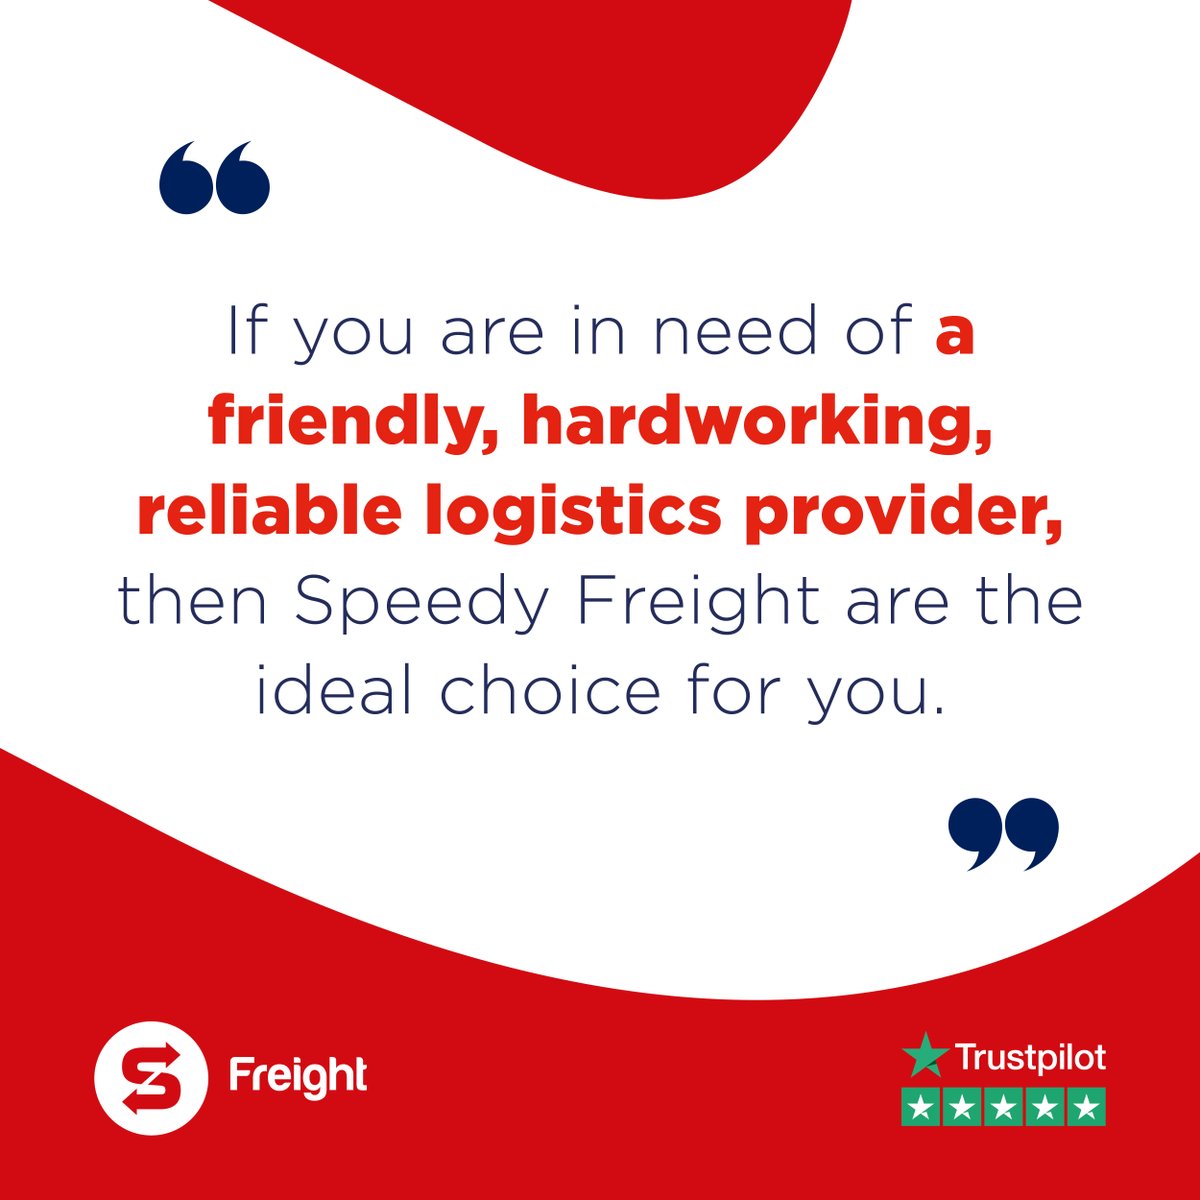 Our customer said it best—if you’re looking for a friendly, hardworking, and reliable #logistics provider, then look no further than #SpeedyFreight. ➡️ Get in touch to learn more about our personalised logistics services: hubs.la/Q02yf7YG0